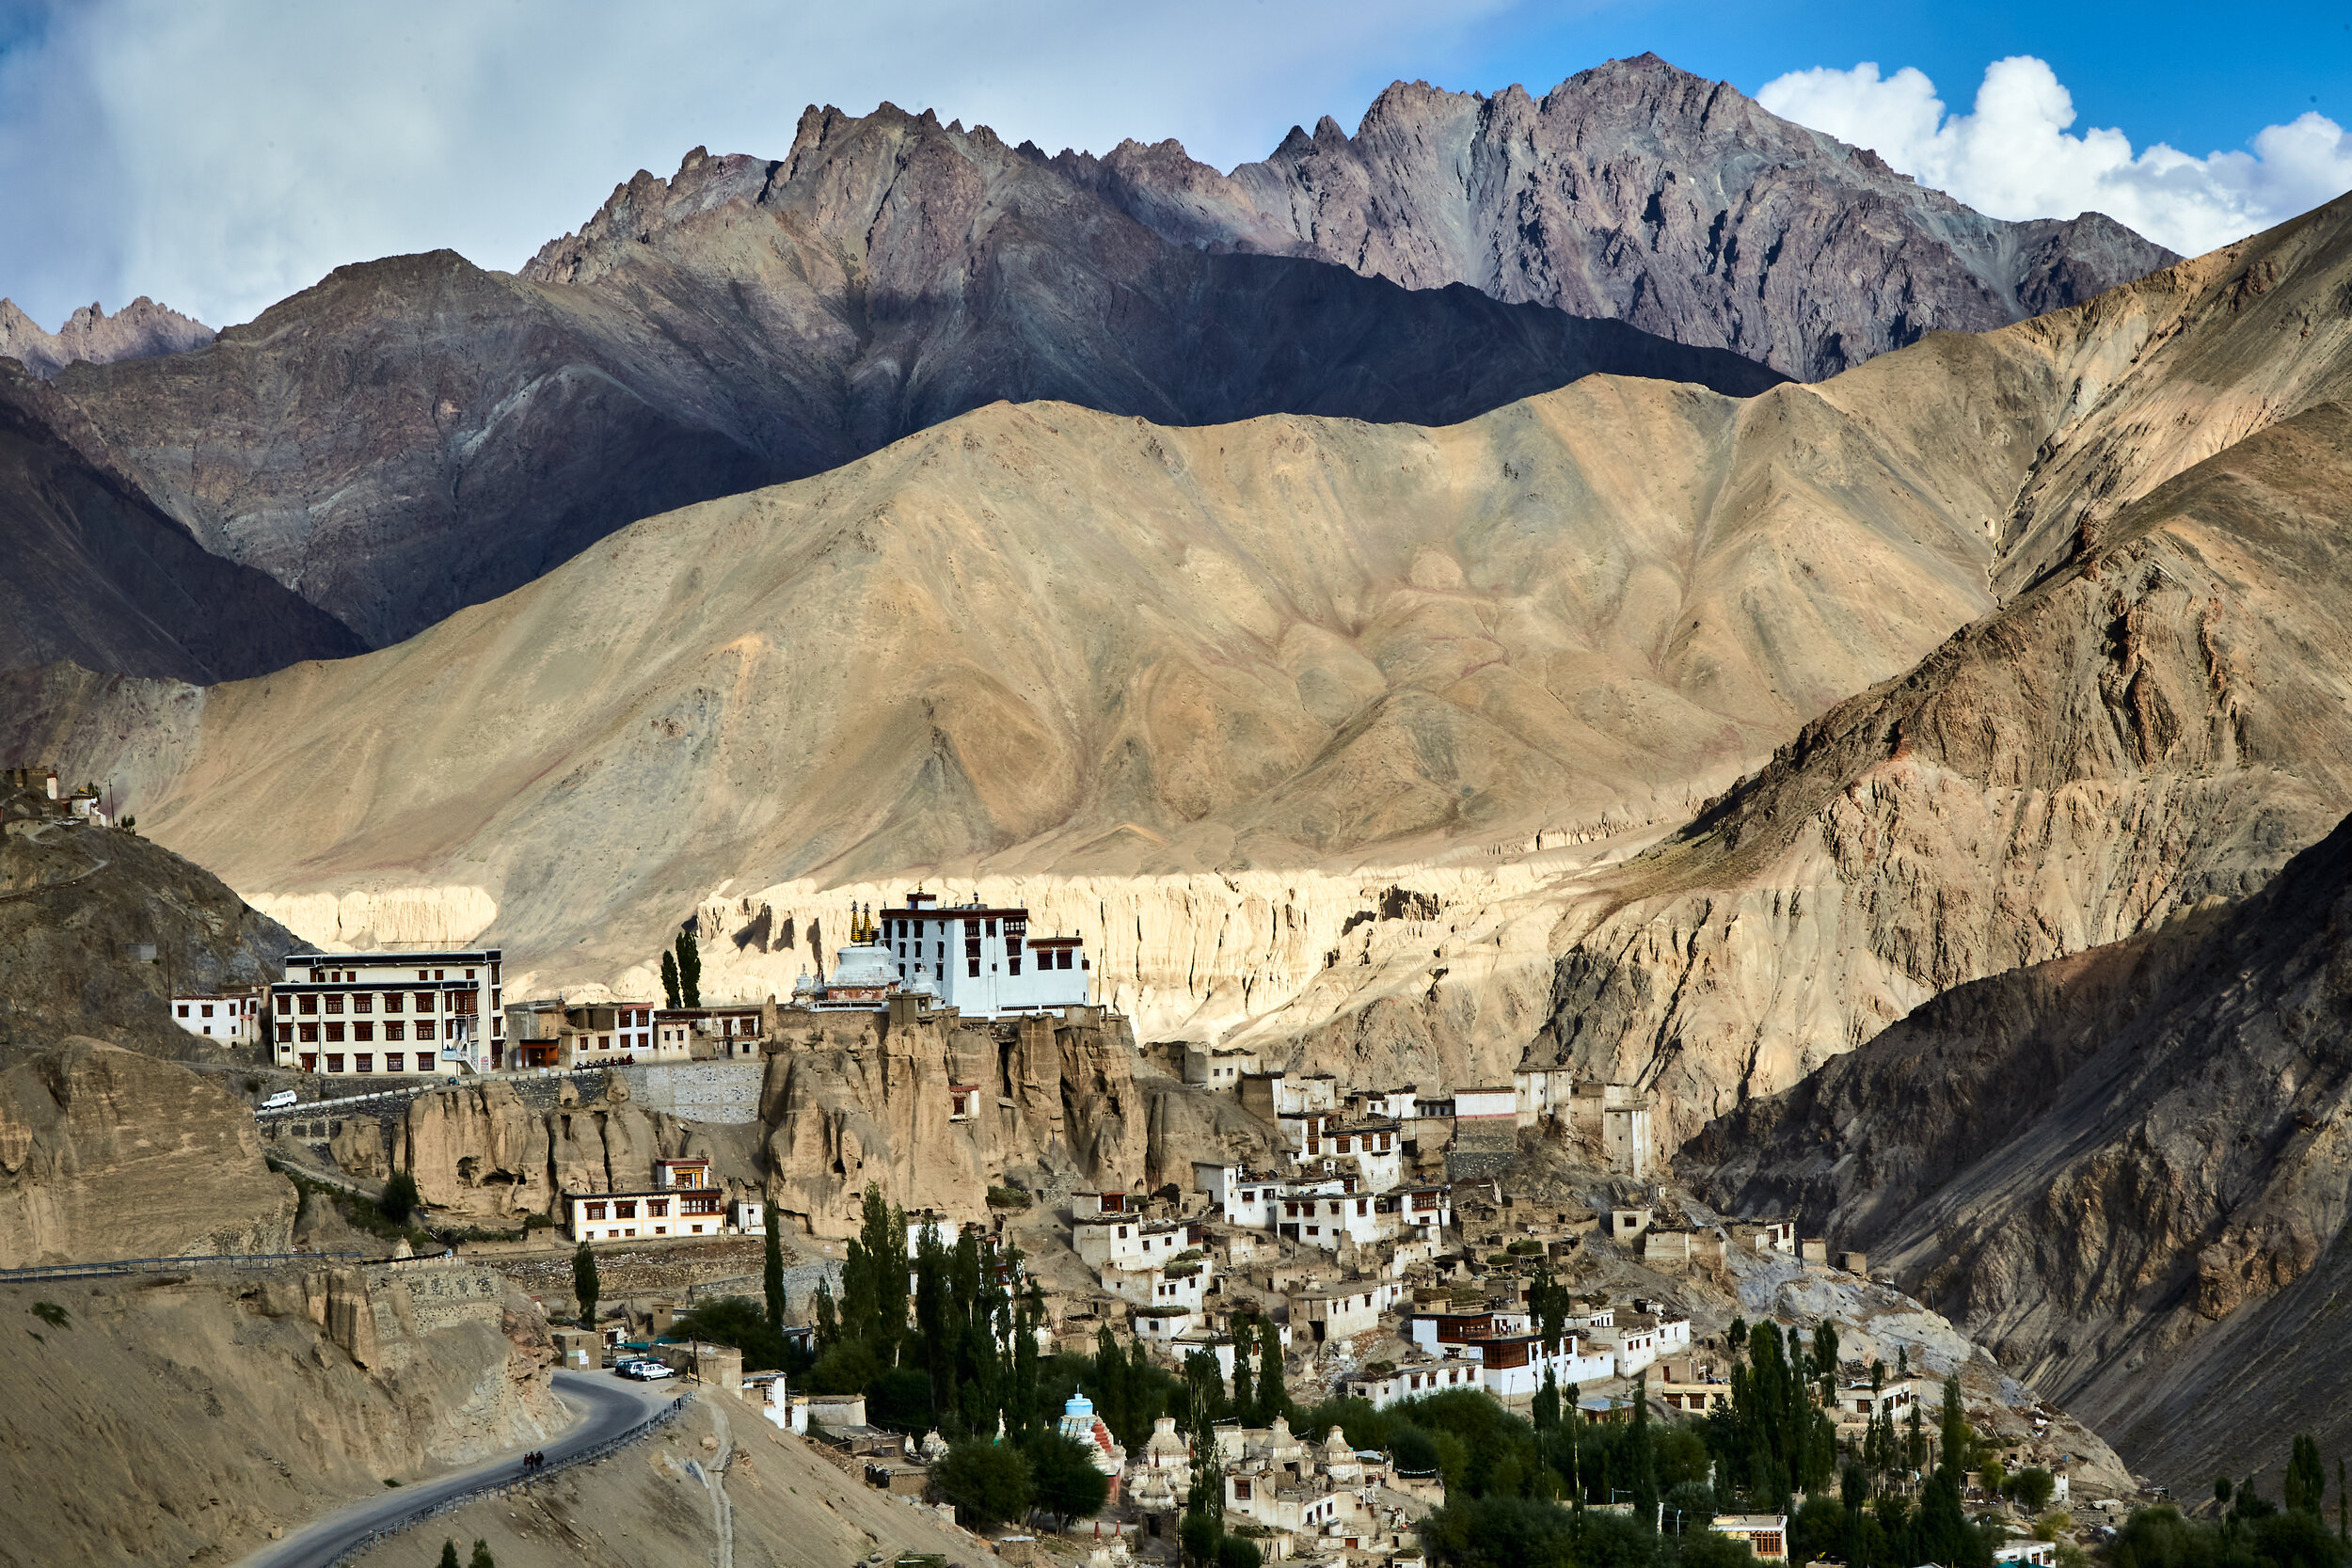  Lamayaru monastery, one of the prominent monastery complex in Ladakh surrounded by Himalayan landscape. 